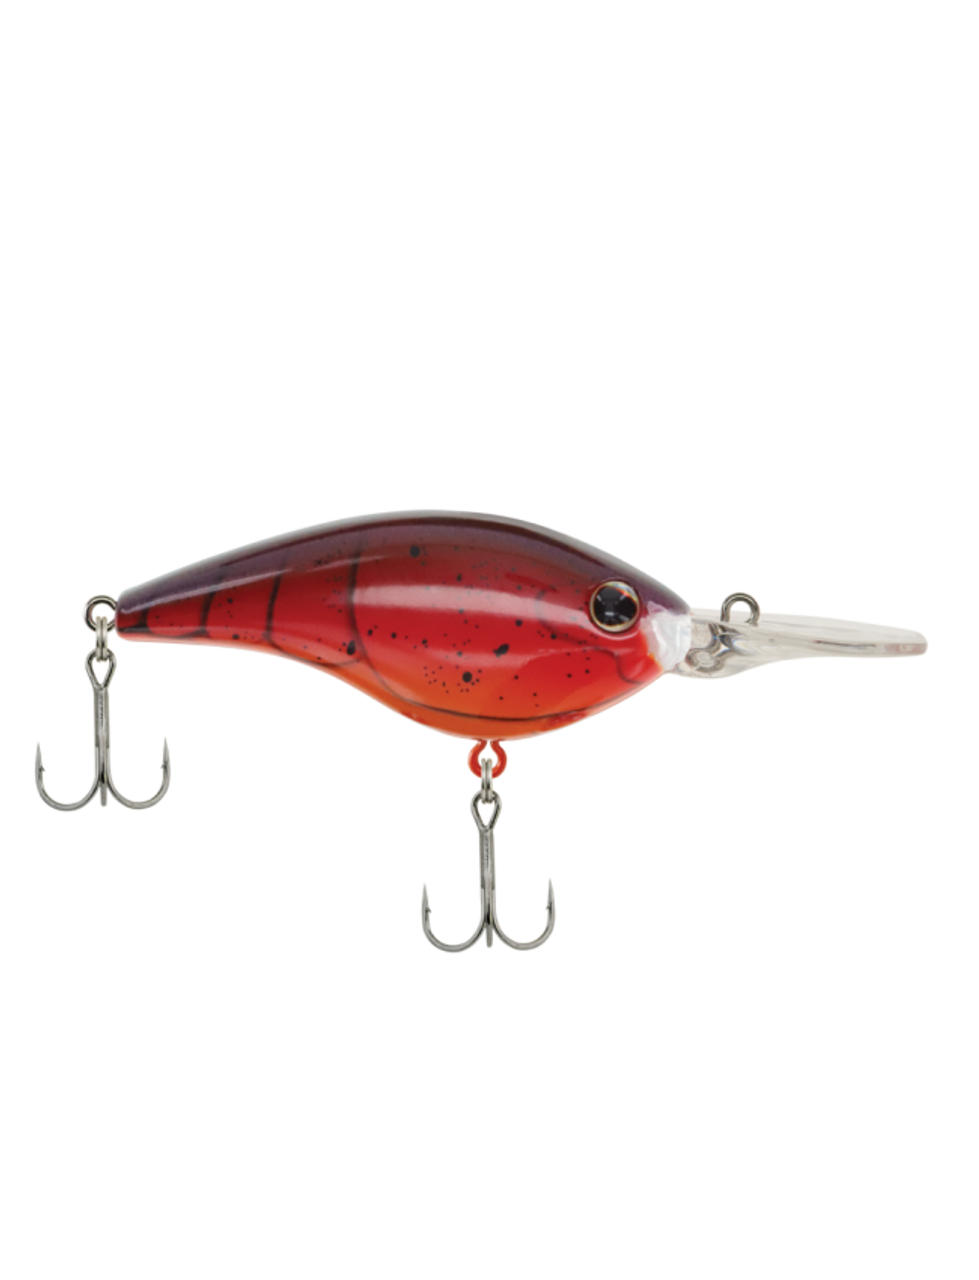 https://cdn11.bigcommerce.com/s-juamt7rae6/images/stencil/1280x1280/products/8670/13701/Berkley_Frittside_Special_Red_Craw_2019_alt2__74194.1686875985.png?c=1?imbypass=on